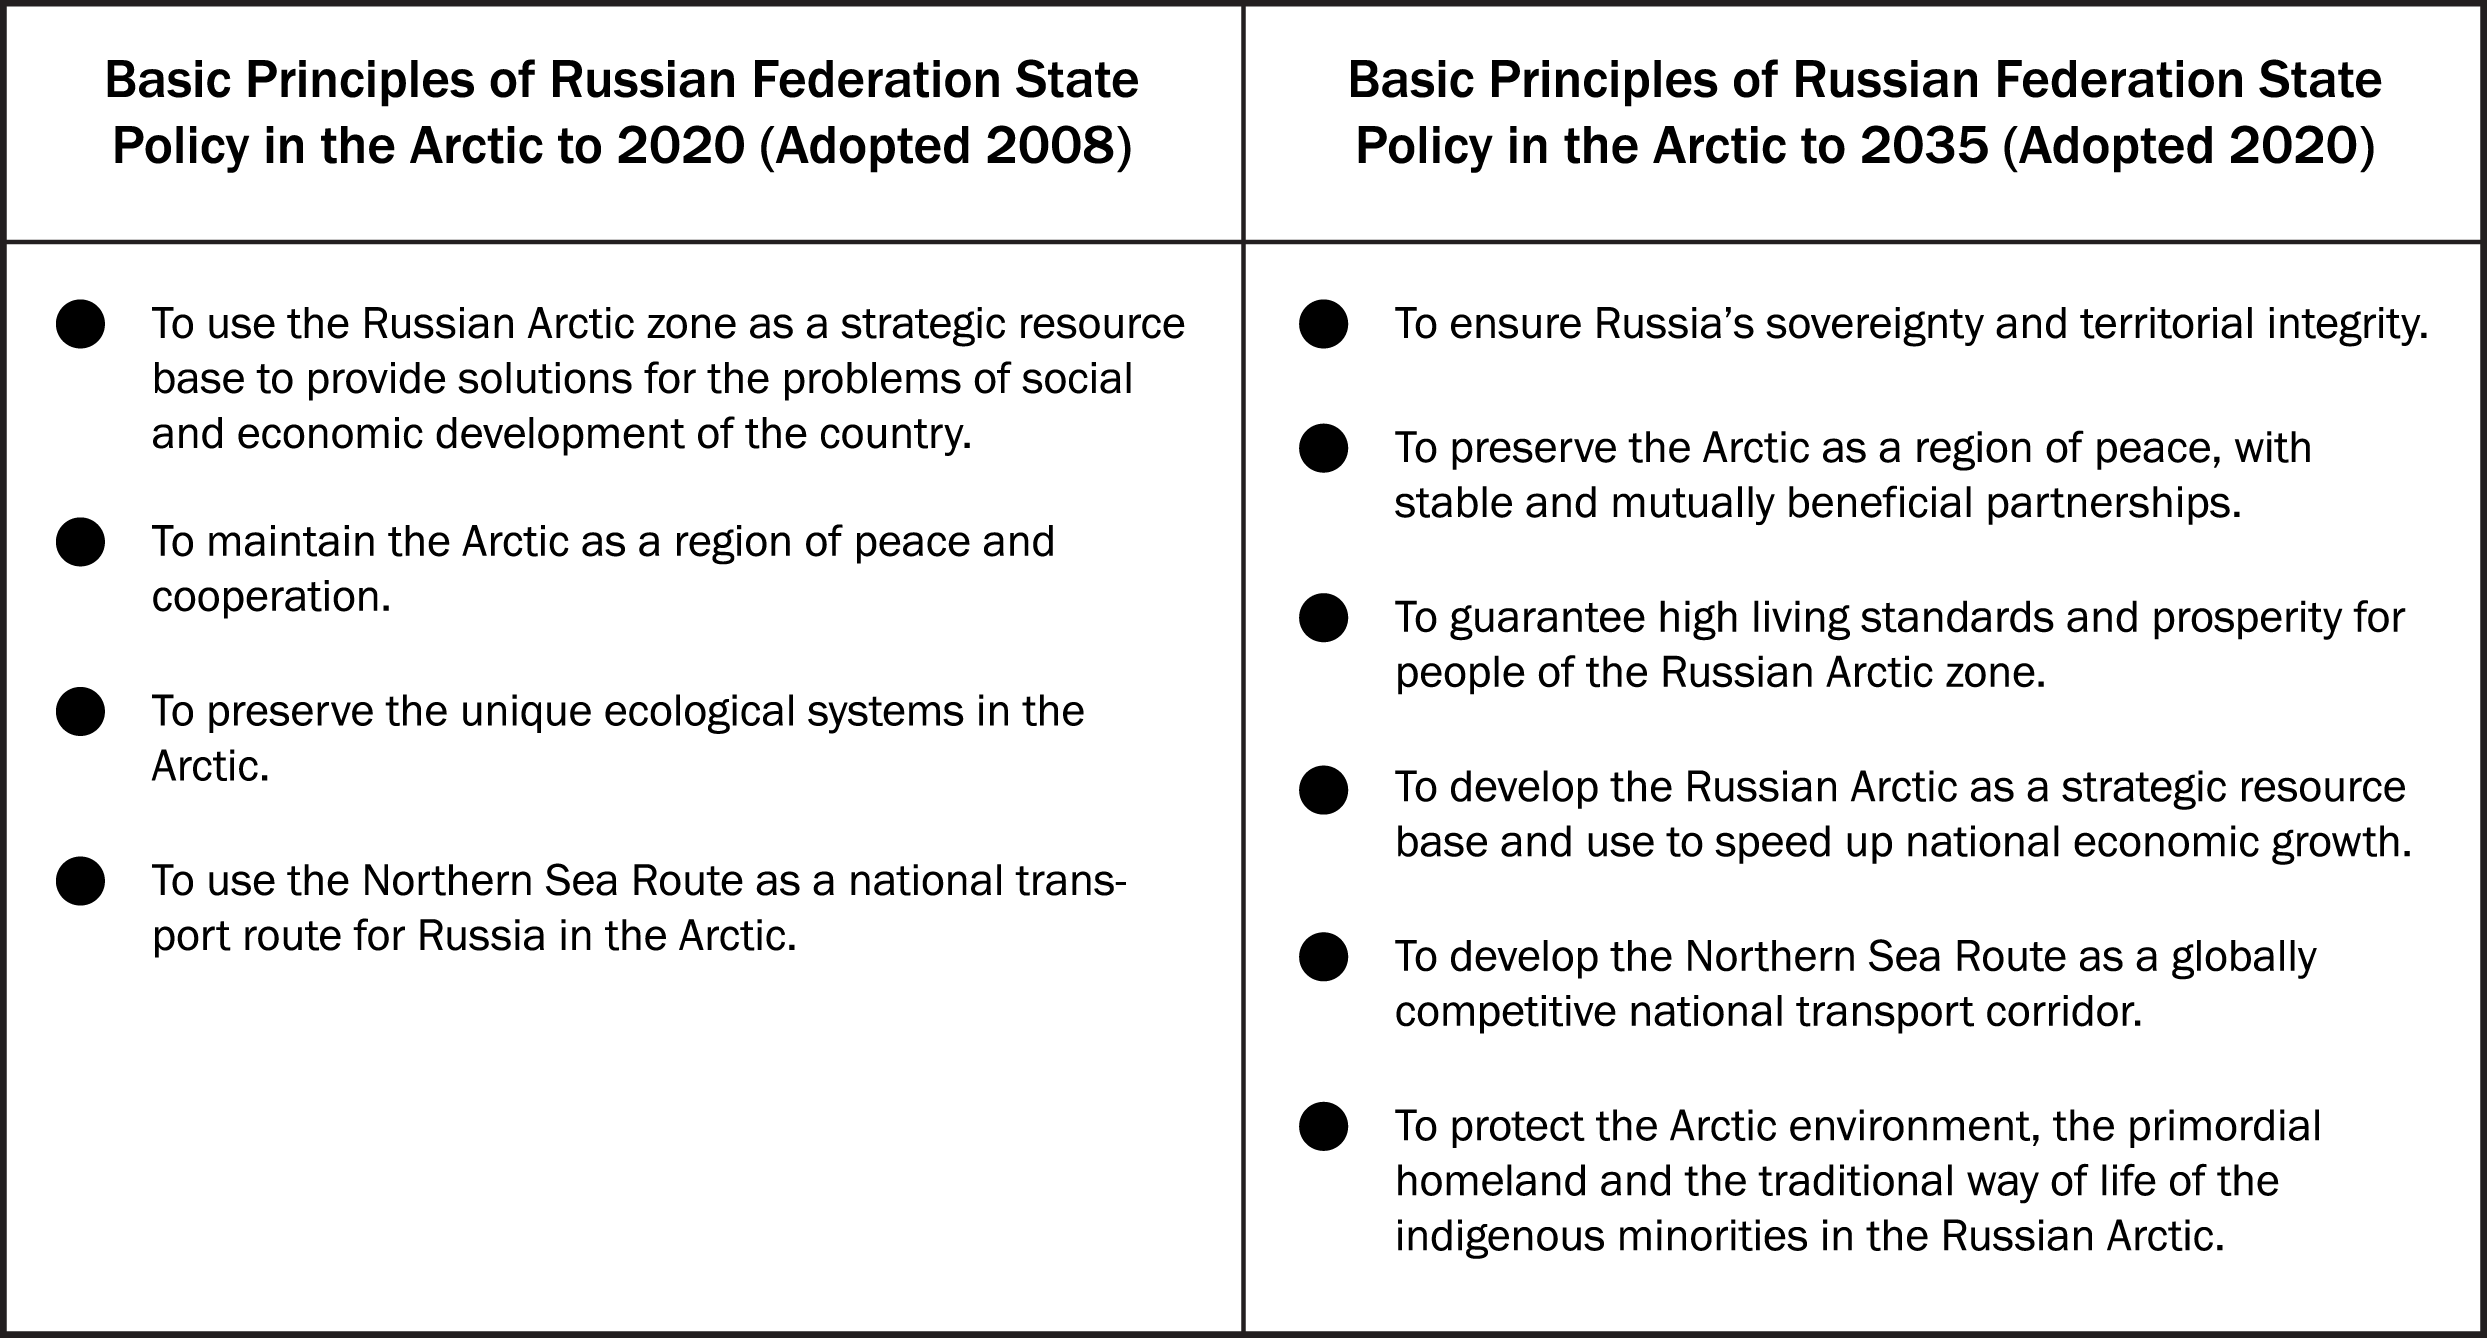 Table 1. Comparison of Russian national interests in the Arctic as outlined in Basic Principles 2020 and Basic Principles 2035